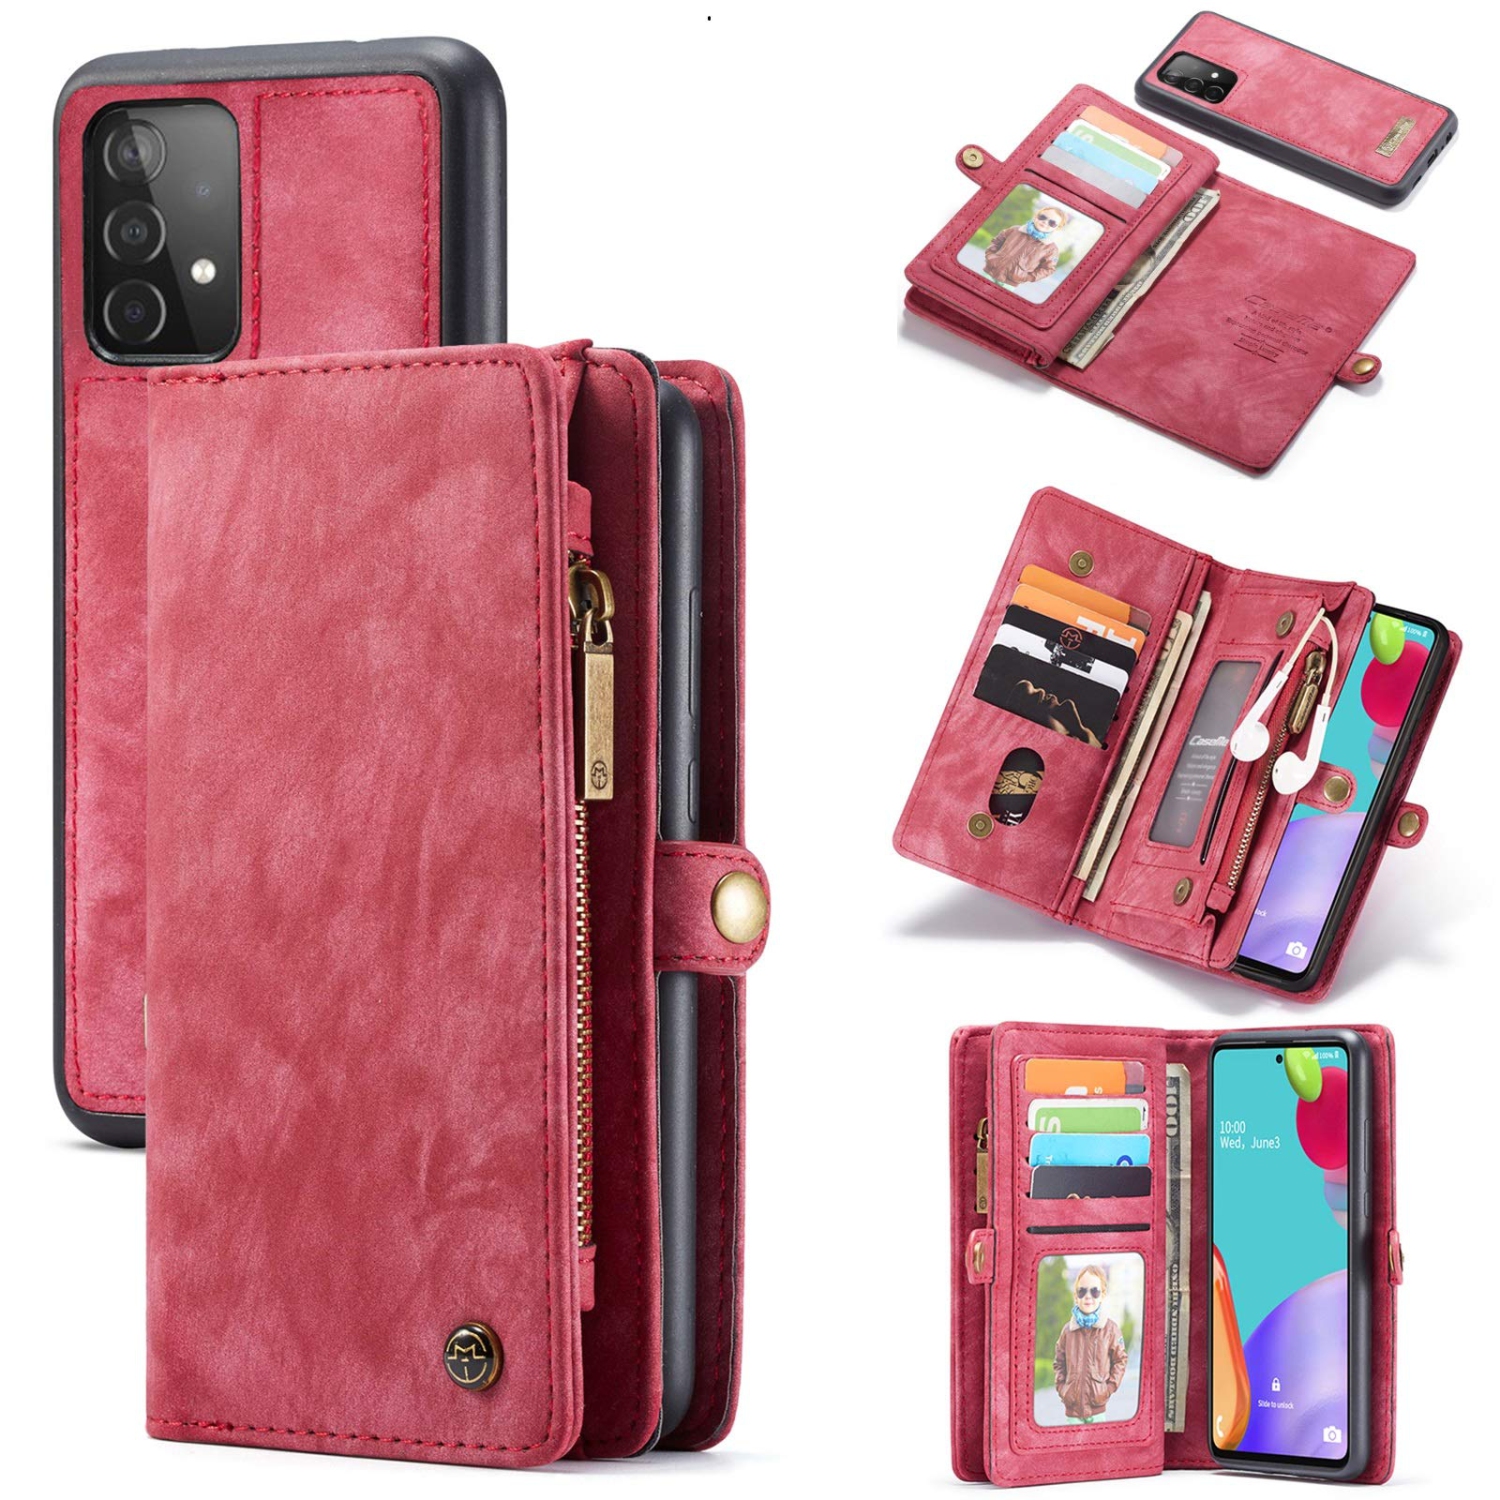 HAII Wallet Case for Samsung Galaxy A52 4G/5G,Premium Leather Zipper 11 Card Slot Multifunction Wallet Leather with Detachab